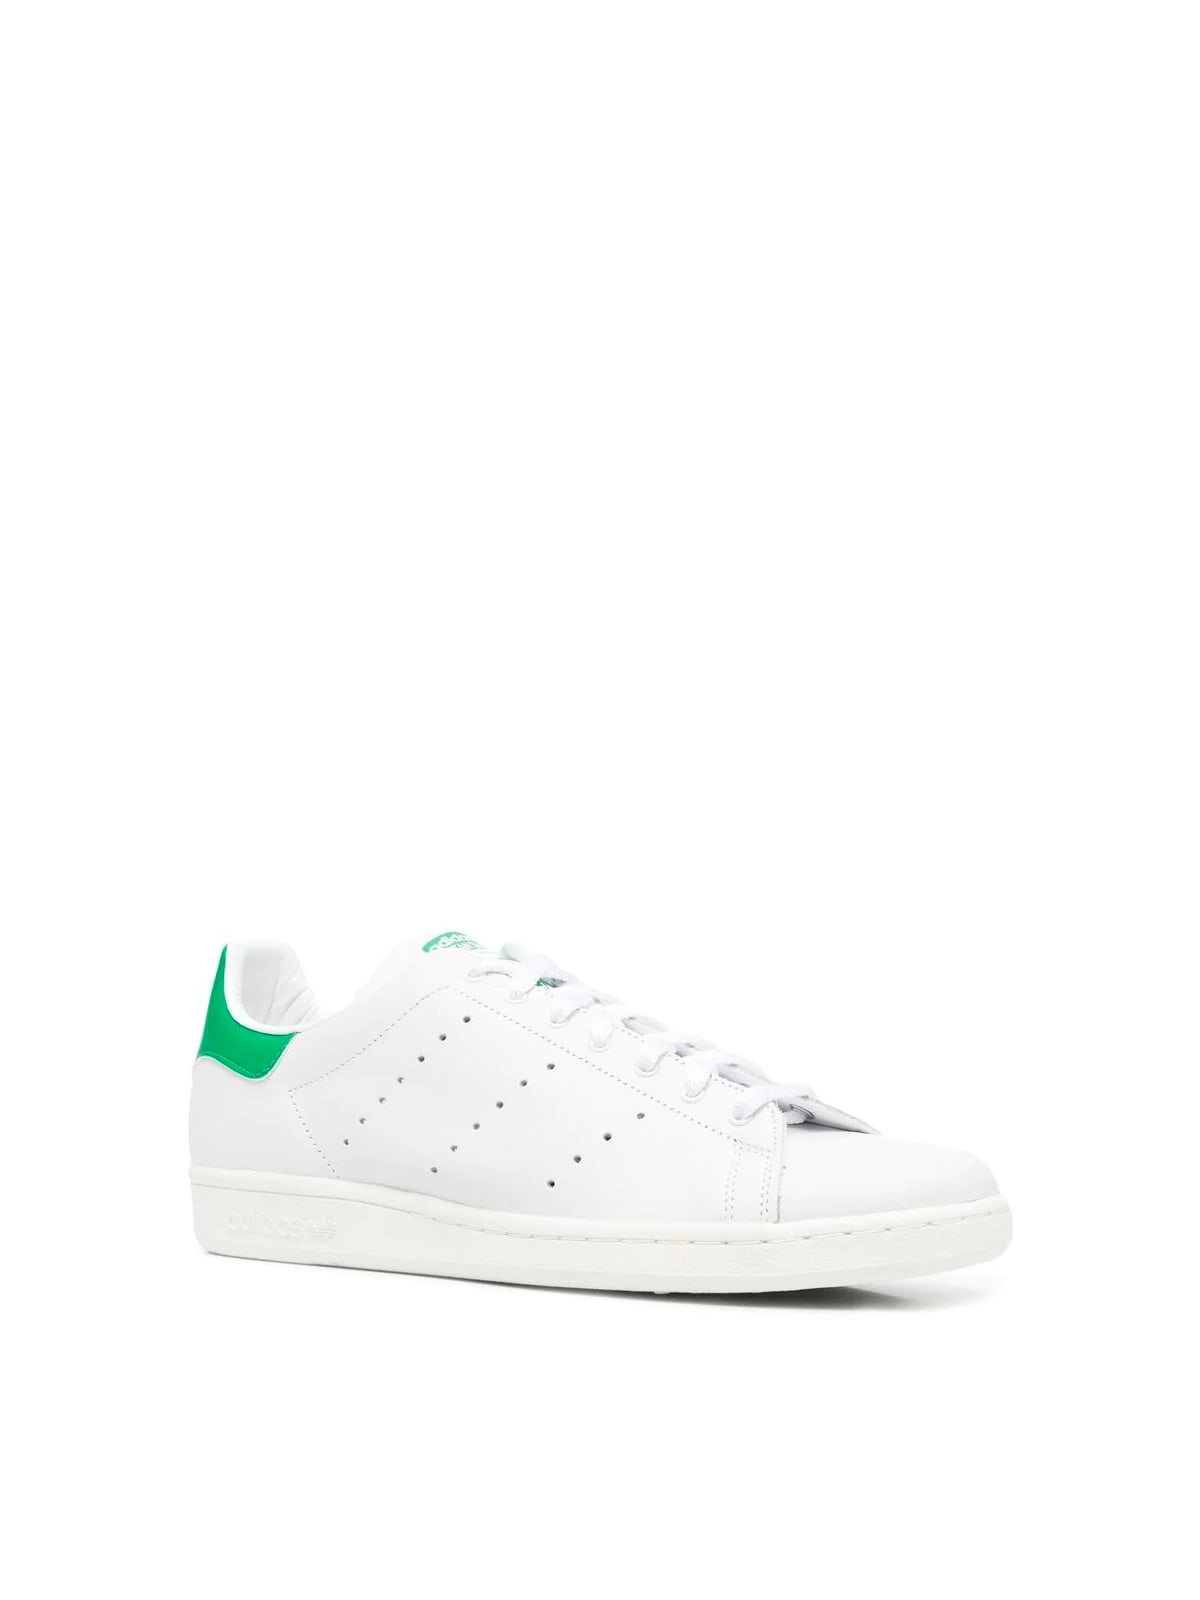 Shop Adidas Originals Stan Smith 80s Sneakers In Ftwwht Ftwwht Green